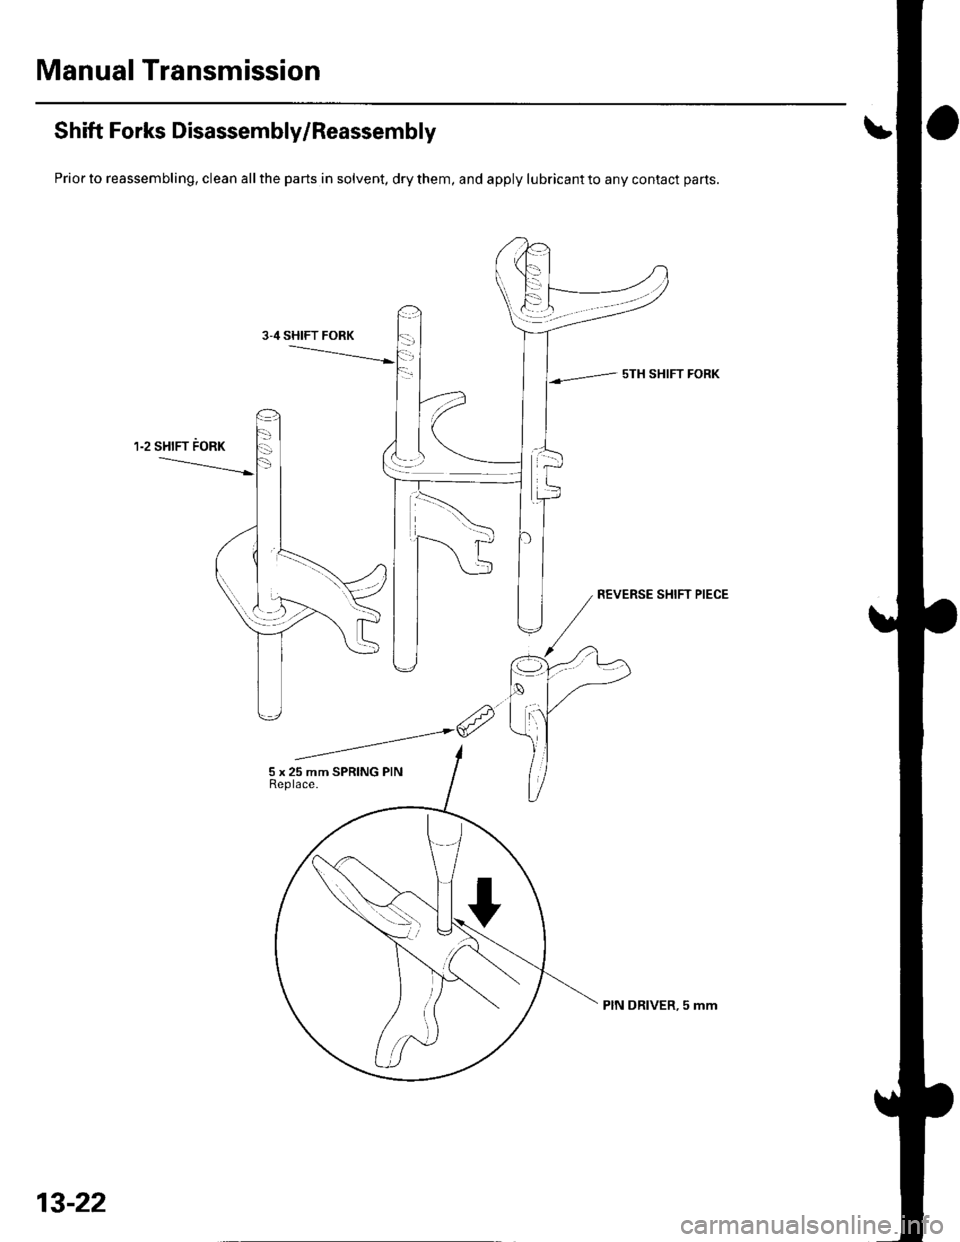 HONDA CIVIC 2003 7.G User Guide Manual Transmission
Shift Forks Disassembly/Reassembly
Prior to reassembling, clean all the parts in solvent, dry them, and apply lubricant to any contact parts.
sTH SHIFT FORK
13-22
PIN DRIVER, 5 mm 